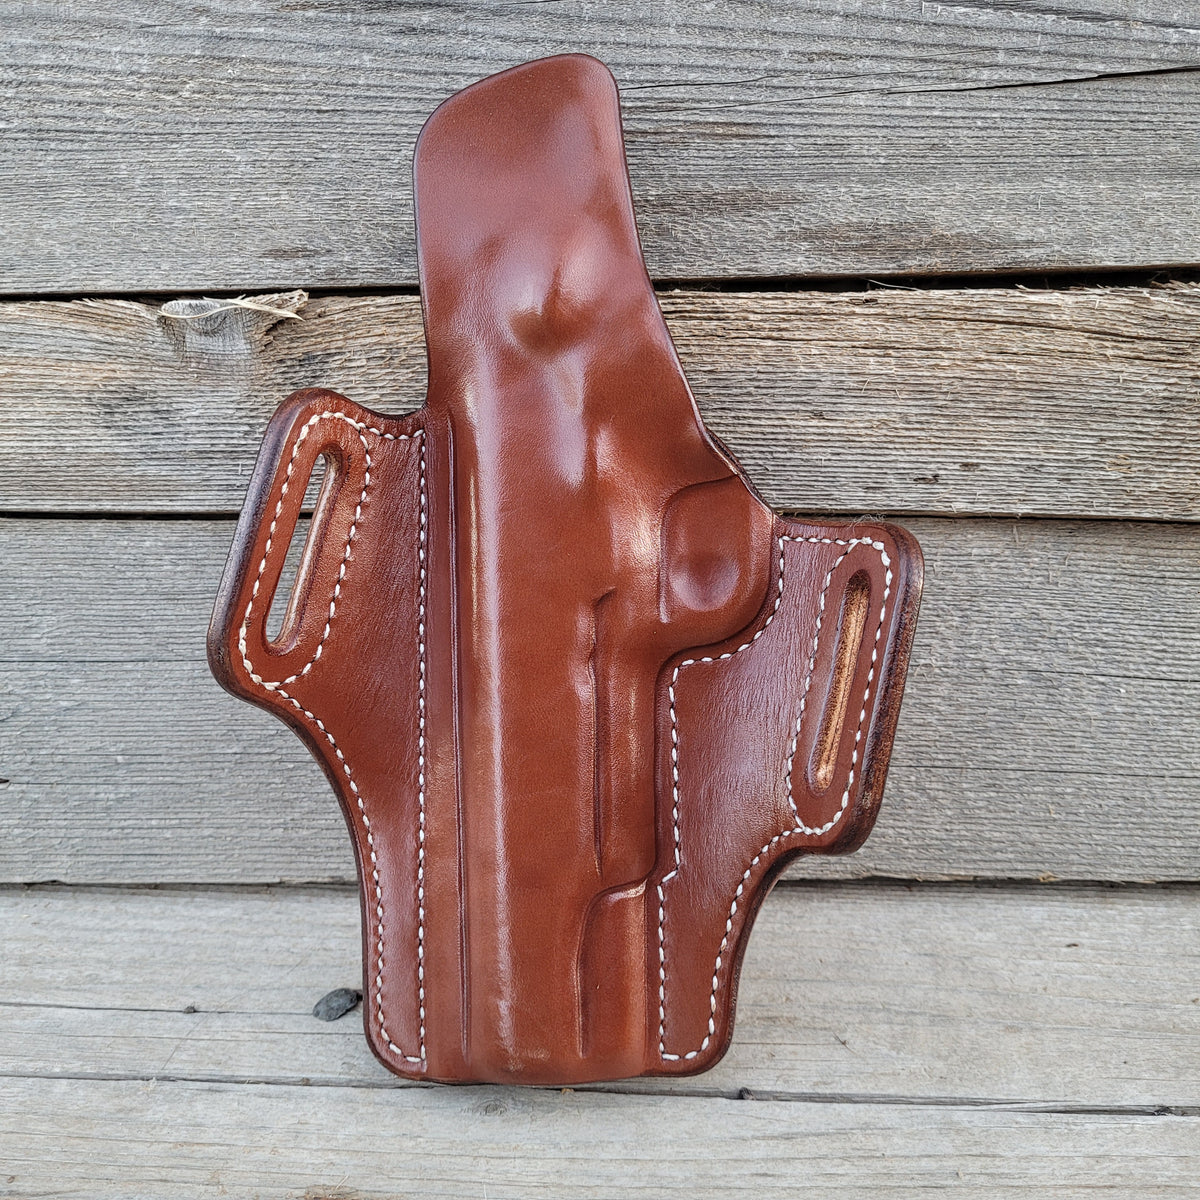 5" 1911 Classic Holster Brown/Chestnut white stitching with basket stamp